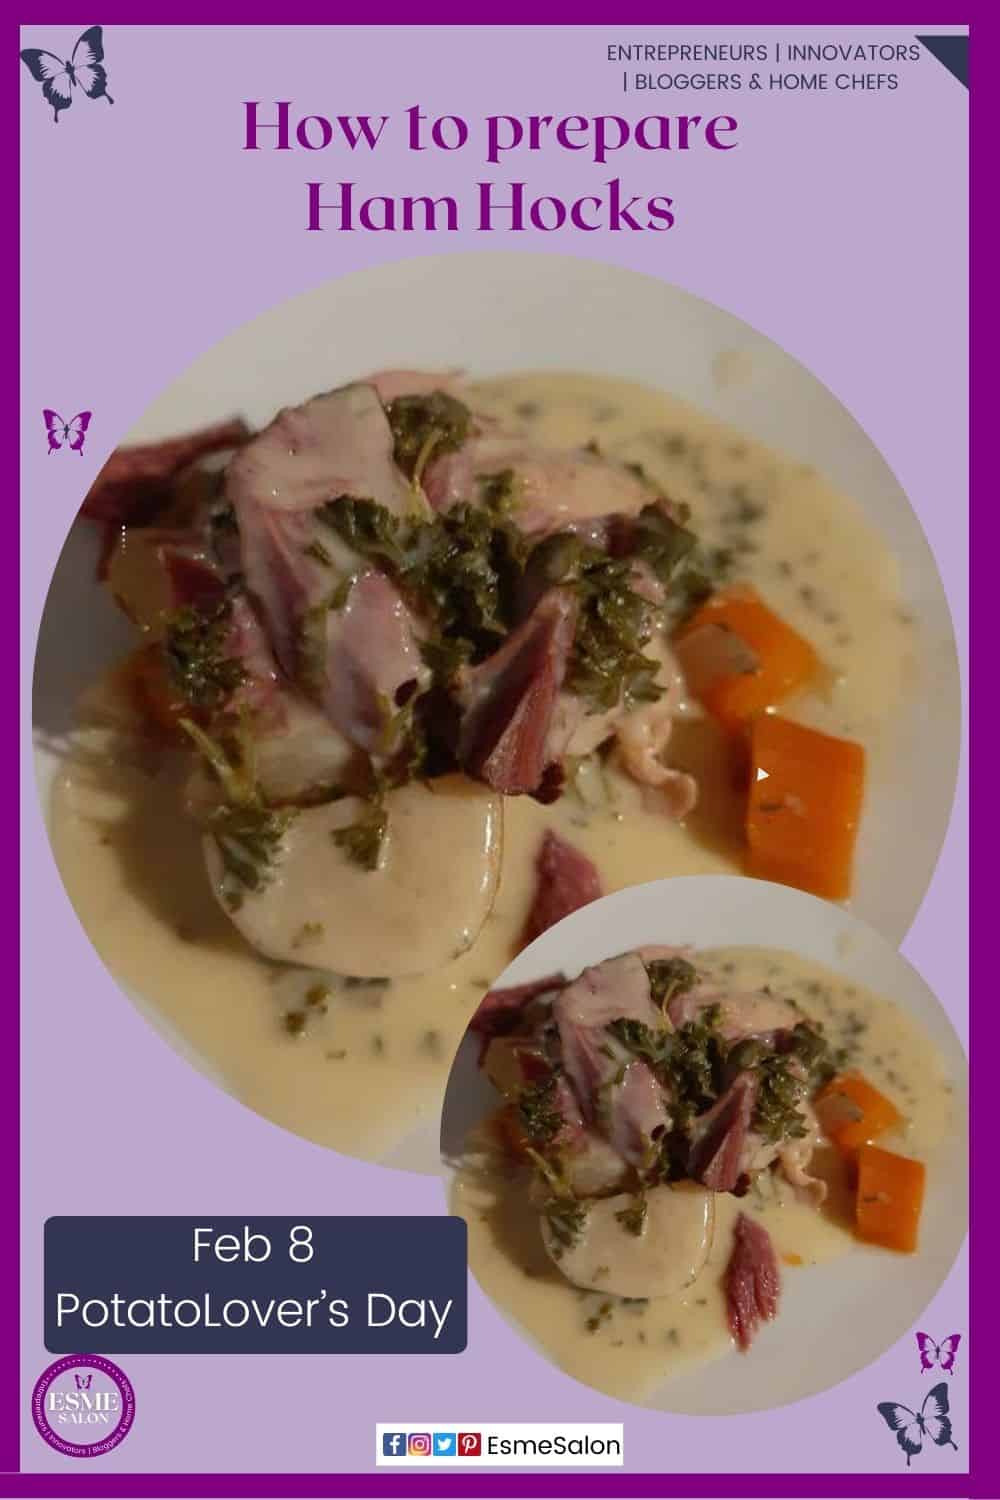 an image of a plate filled with Ham Hocks, potato and greens and carrots